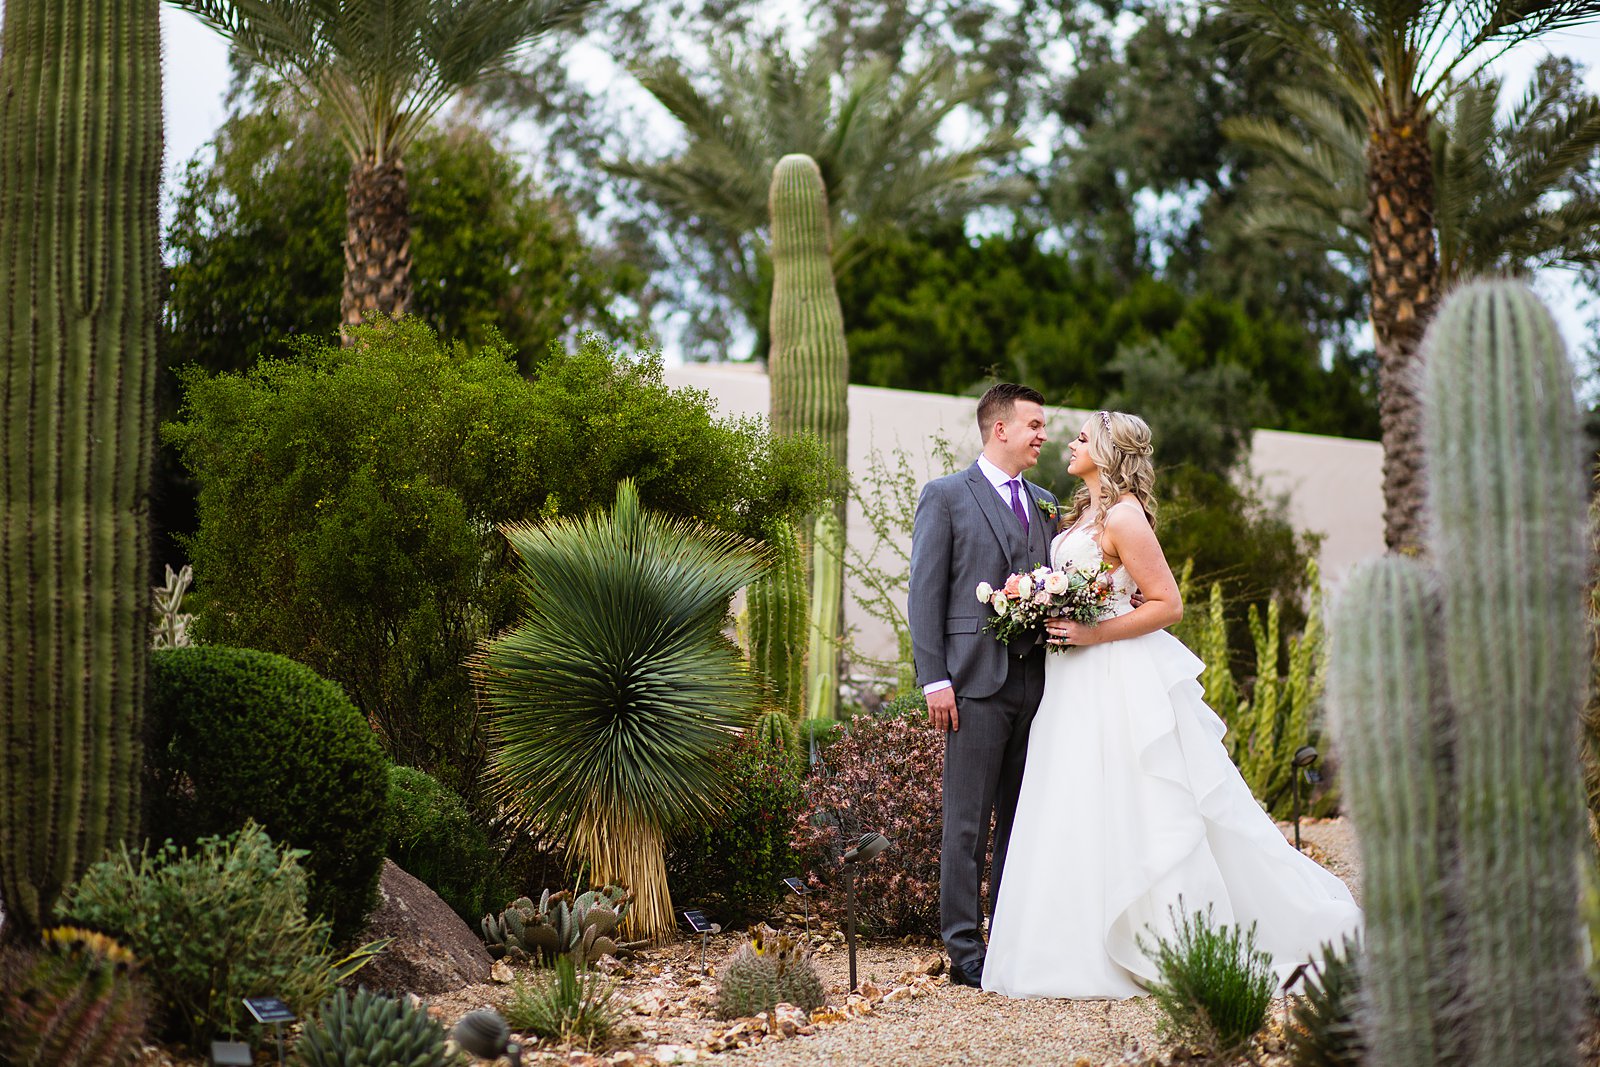 Bride and Groom pose during their The Scottsdale Resort at McCormick Ranch wedding by Arizona wedding photographer PMA Photography.